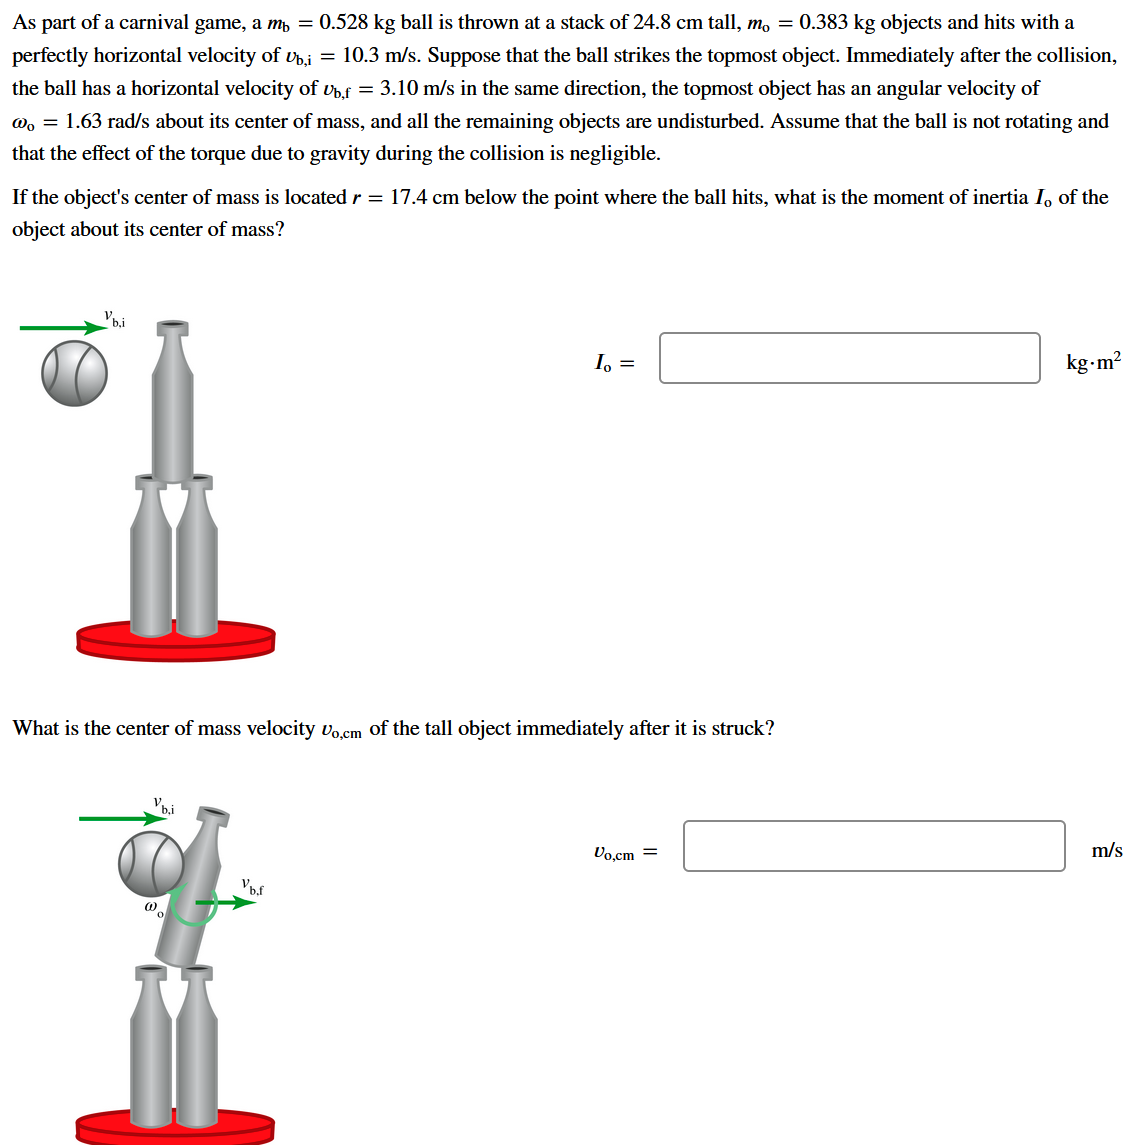 As part of a carnival game, a m, = 0.528 kg ball is thrown at a stack of 24.8 cm tall, m, = 0.383 kg objects and hits with a
perfectly horizontal velocity of v,i = 10.3 m/s. Suppose that the ball strikes the topmost object. Immediately after the collision,
the ball has a horizontal velocity of vhf = 3.10 m/s in the same direction, the topmost object has an angular velocity of
@, = 1.63 rad/s about its center of mass, and all the remaining objects are undisturbed. Assume that the ball is not rotating and
that the effect of the torque due to gravity during the collision is negligible.
If the object's center of mass is located r = 17.4 cm below the point where the ball hits, what is the moment of inertia I, of the
object about its center of mass?
I, =
kg-m?
What is the center of mass velocity vo cm of the tall object immediately after it is struck?
Vb.i
Vo.cm =
m/s
